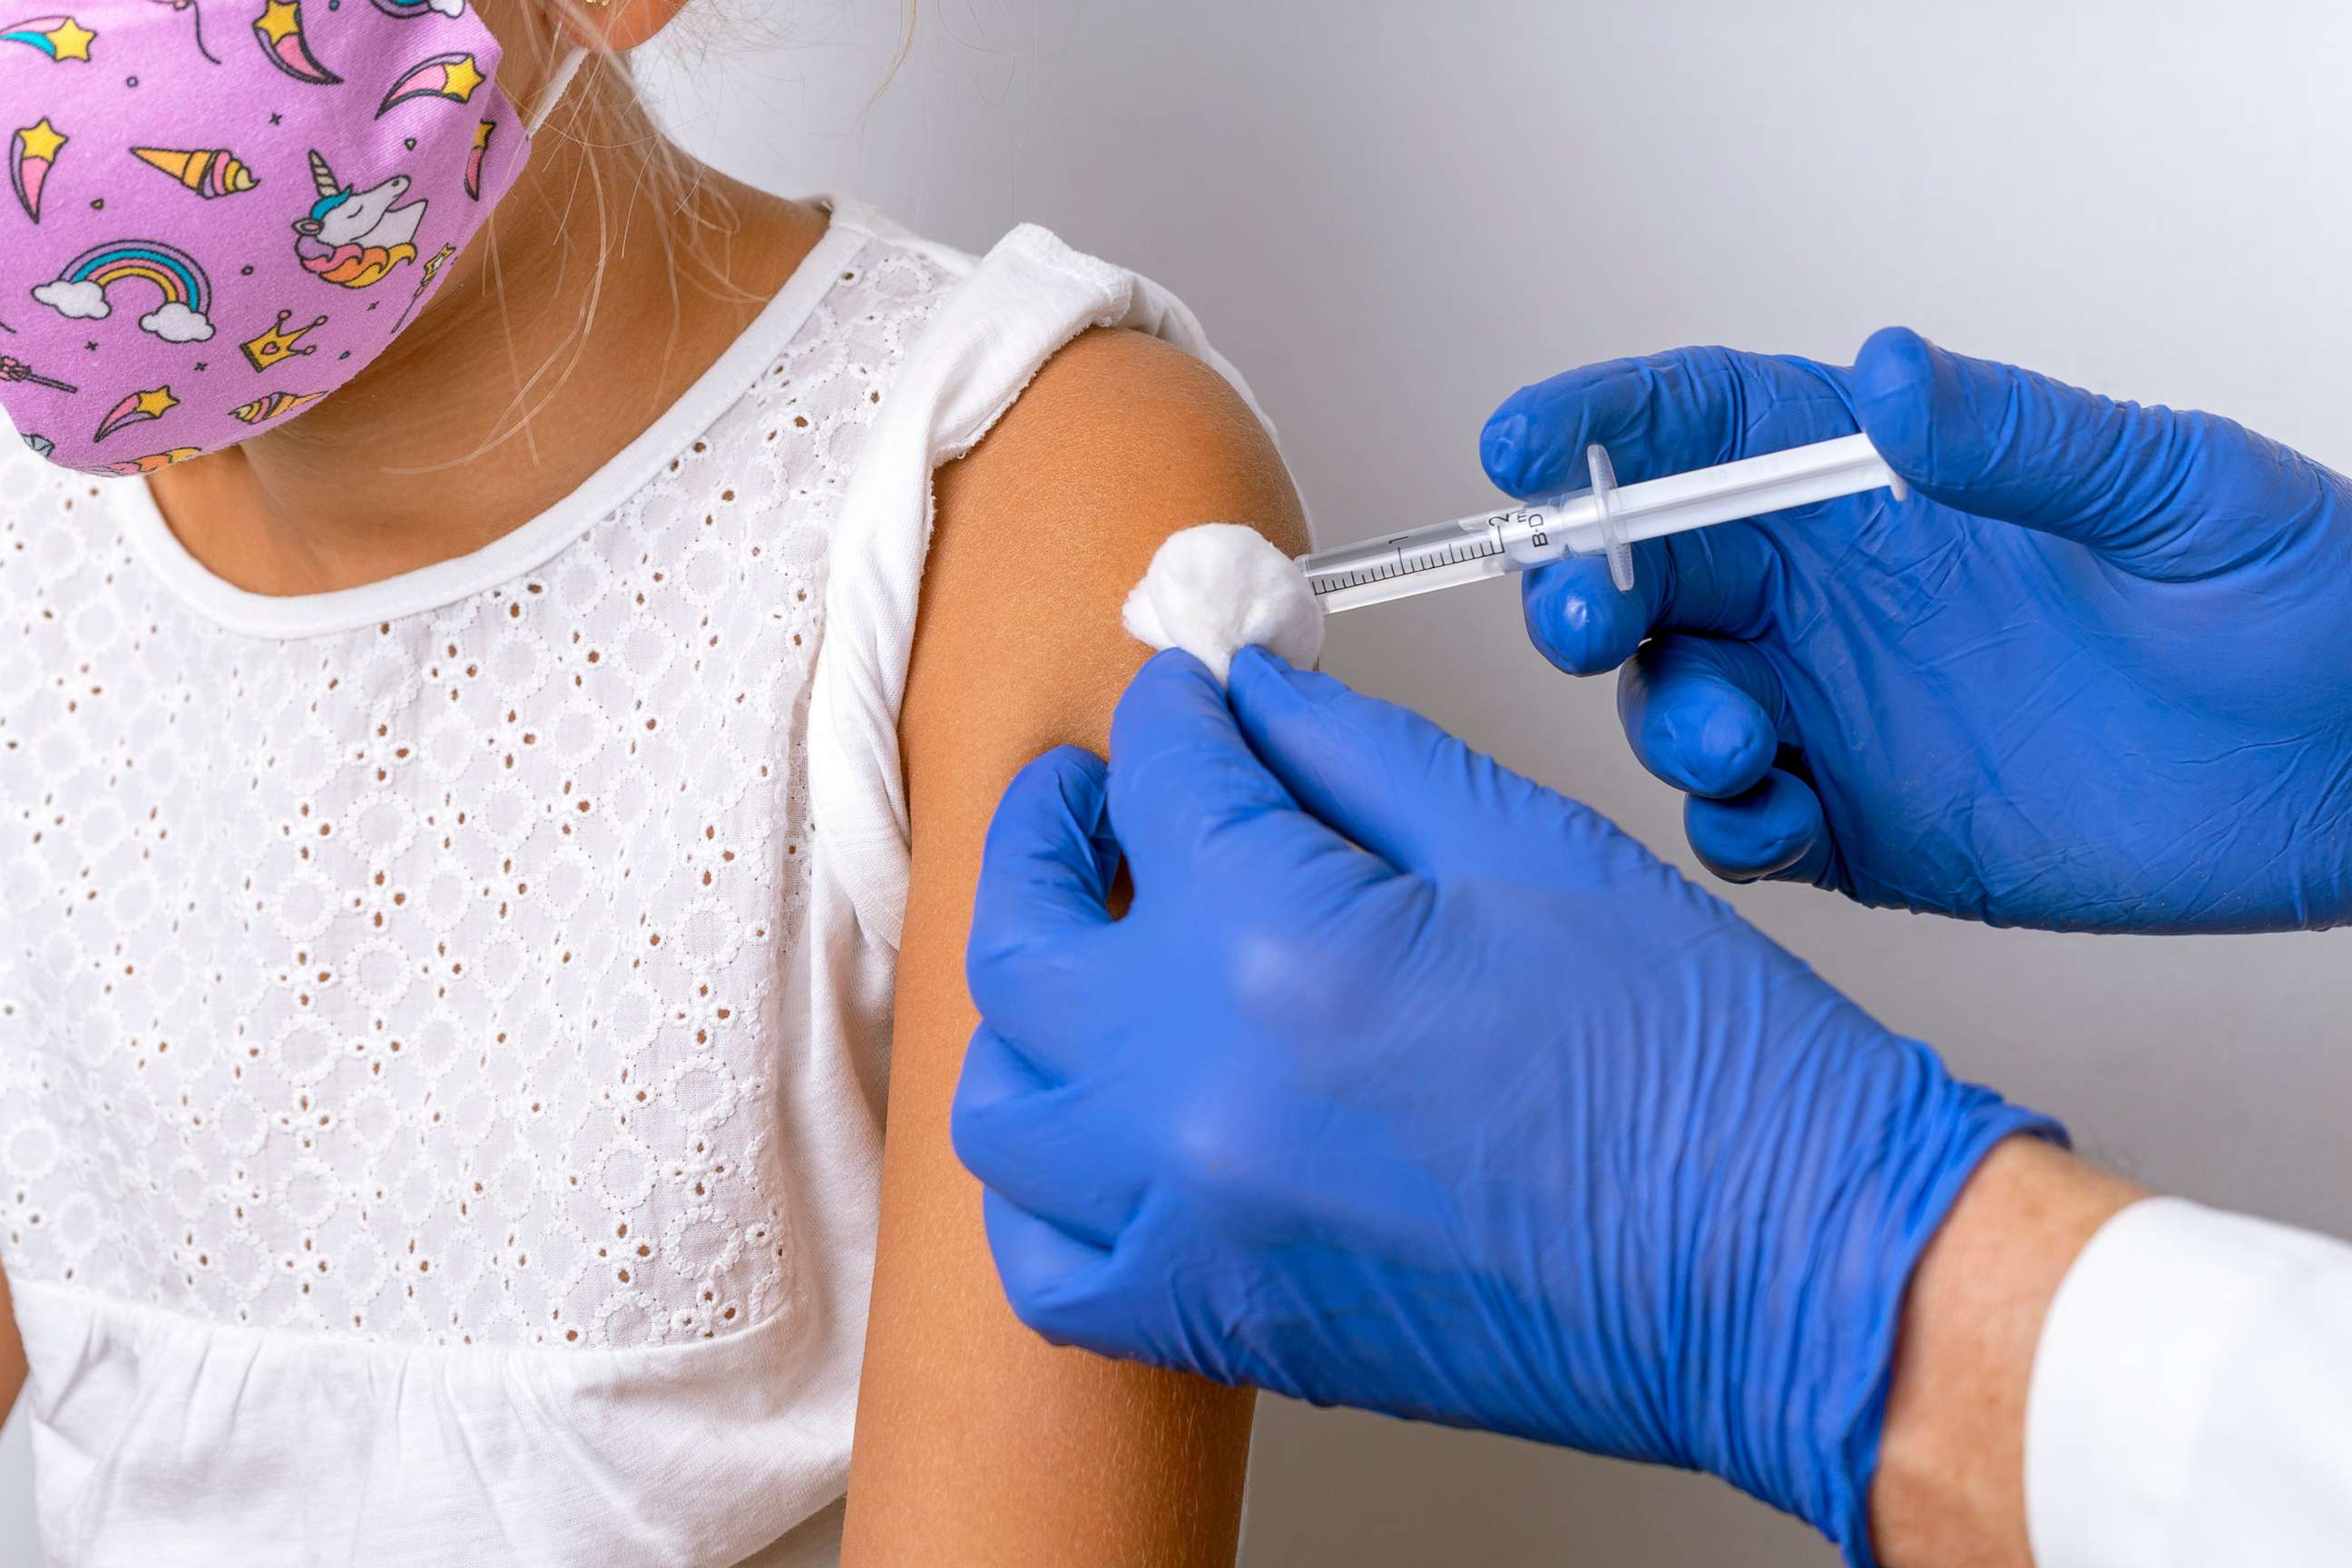 PHOTO: A young girl receives a vaccination injection in an undated stock image.